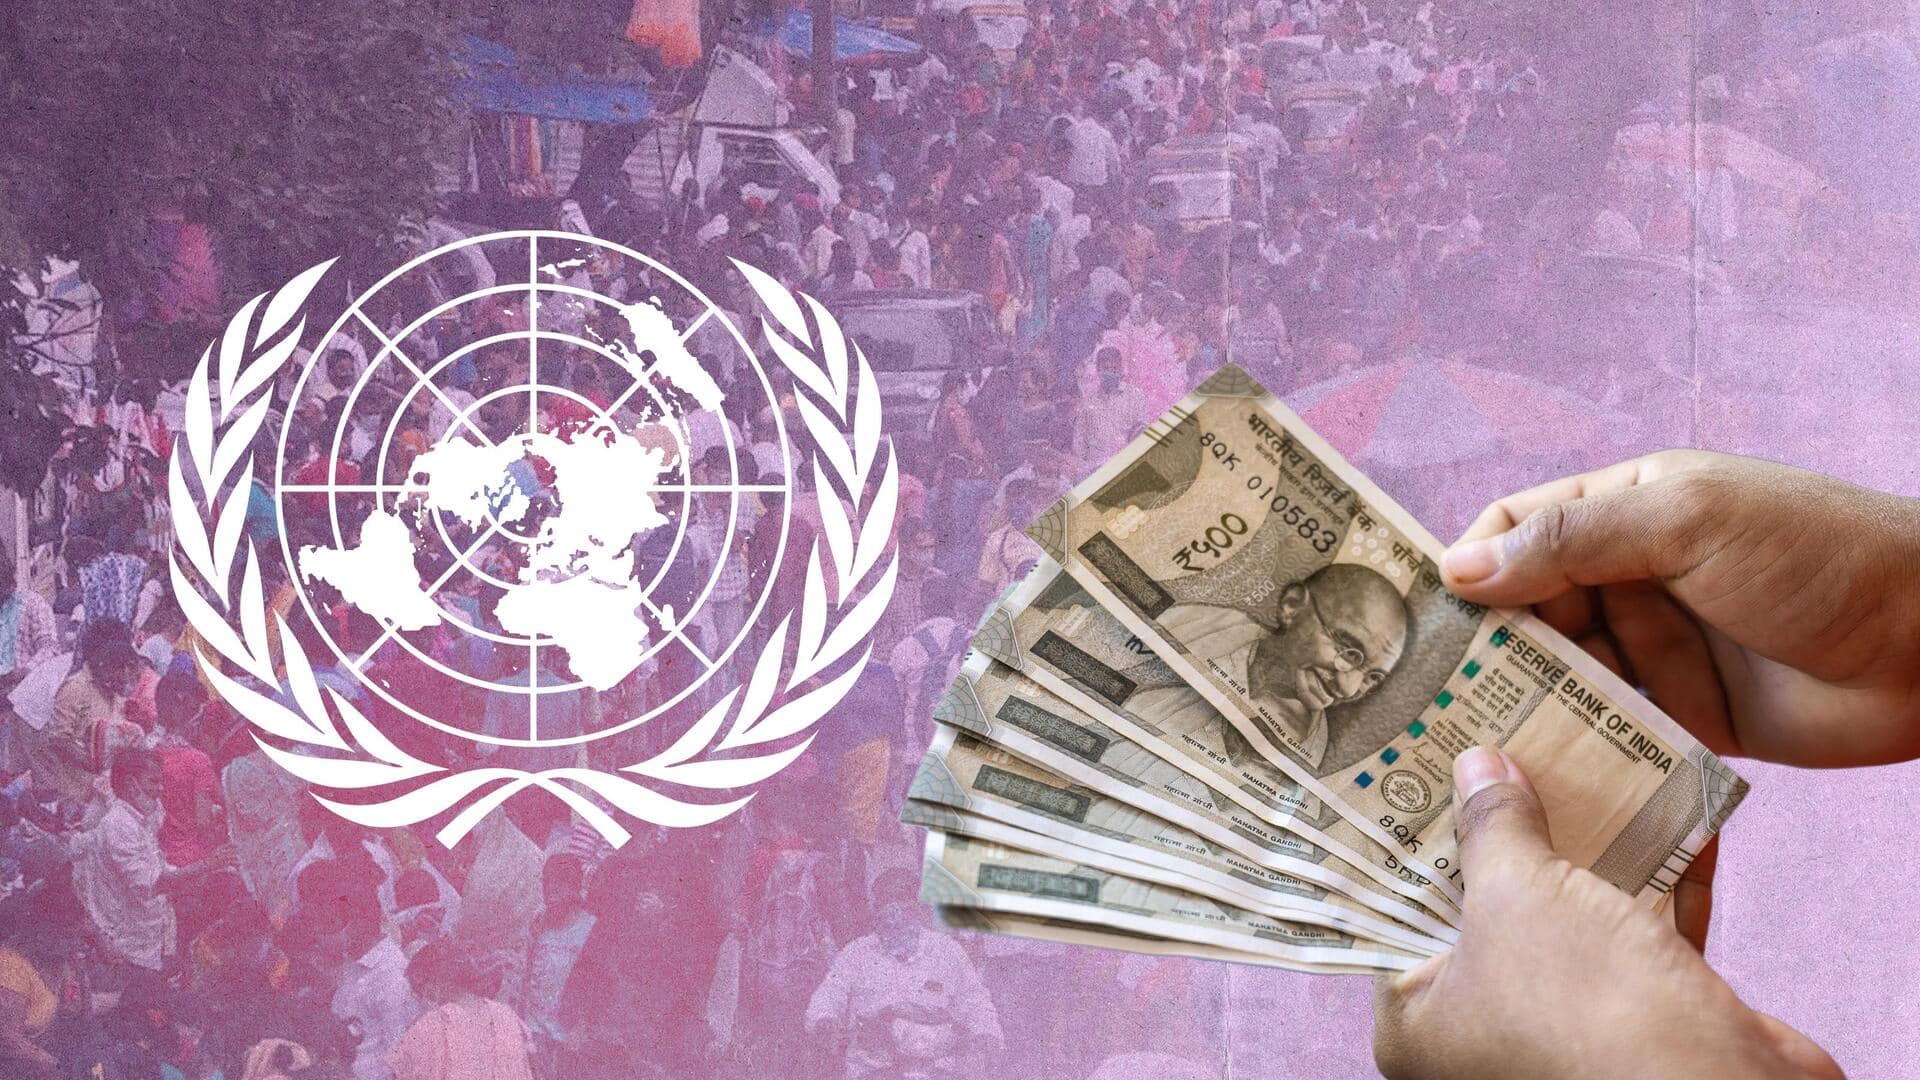 UN lauds India for lifting 415 million out of poverty